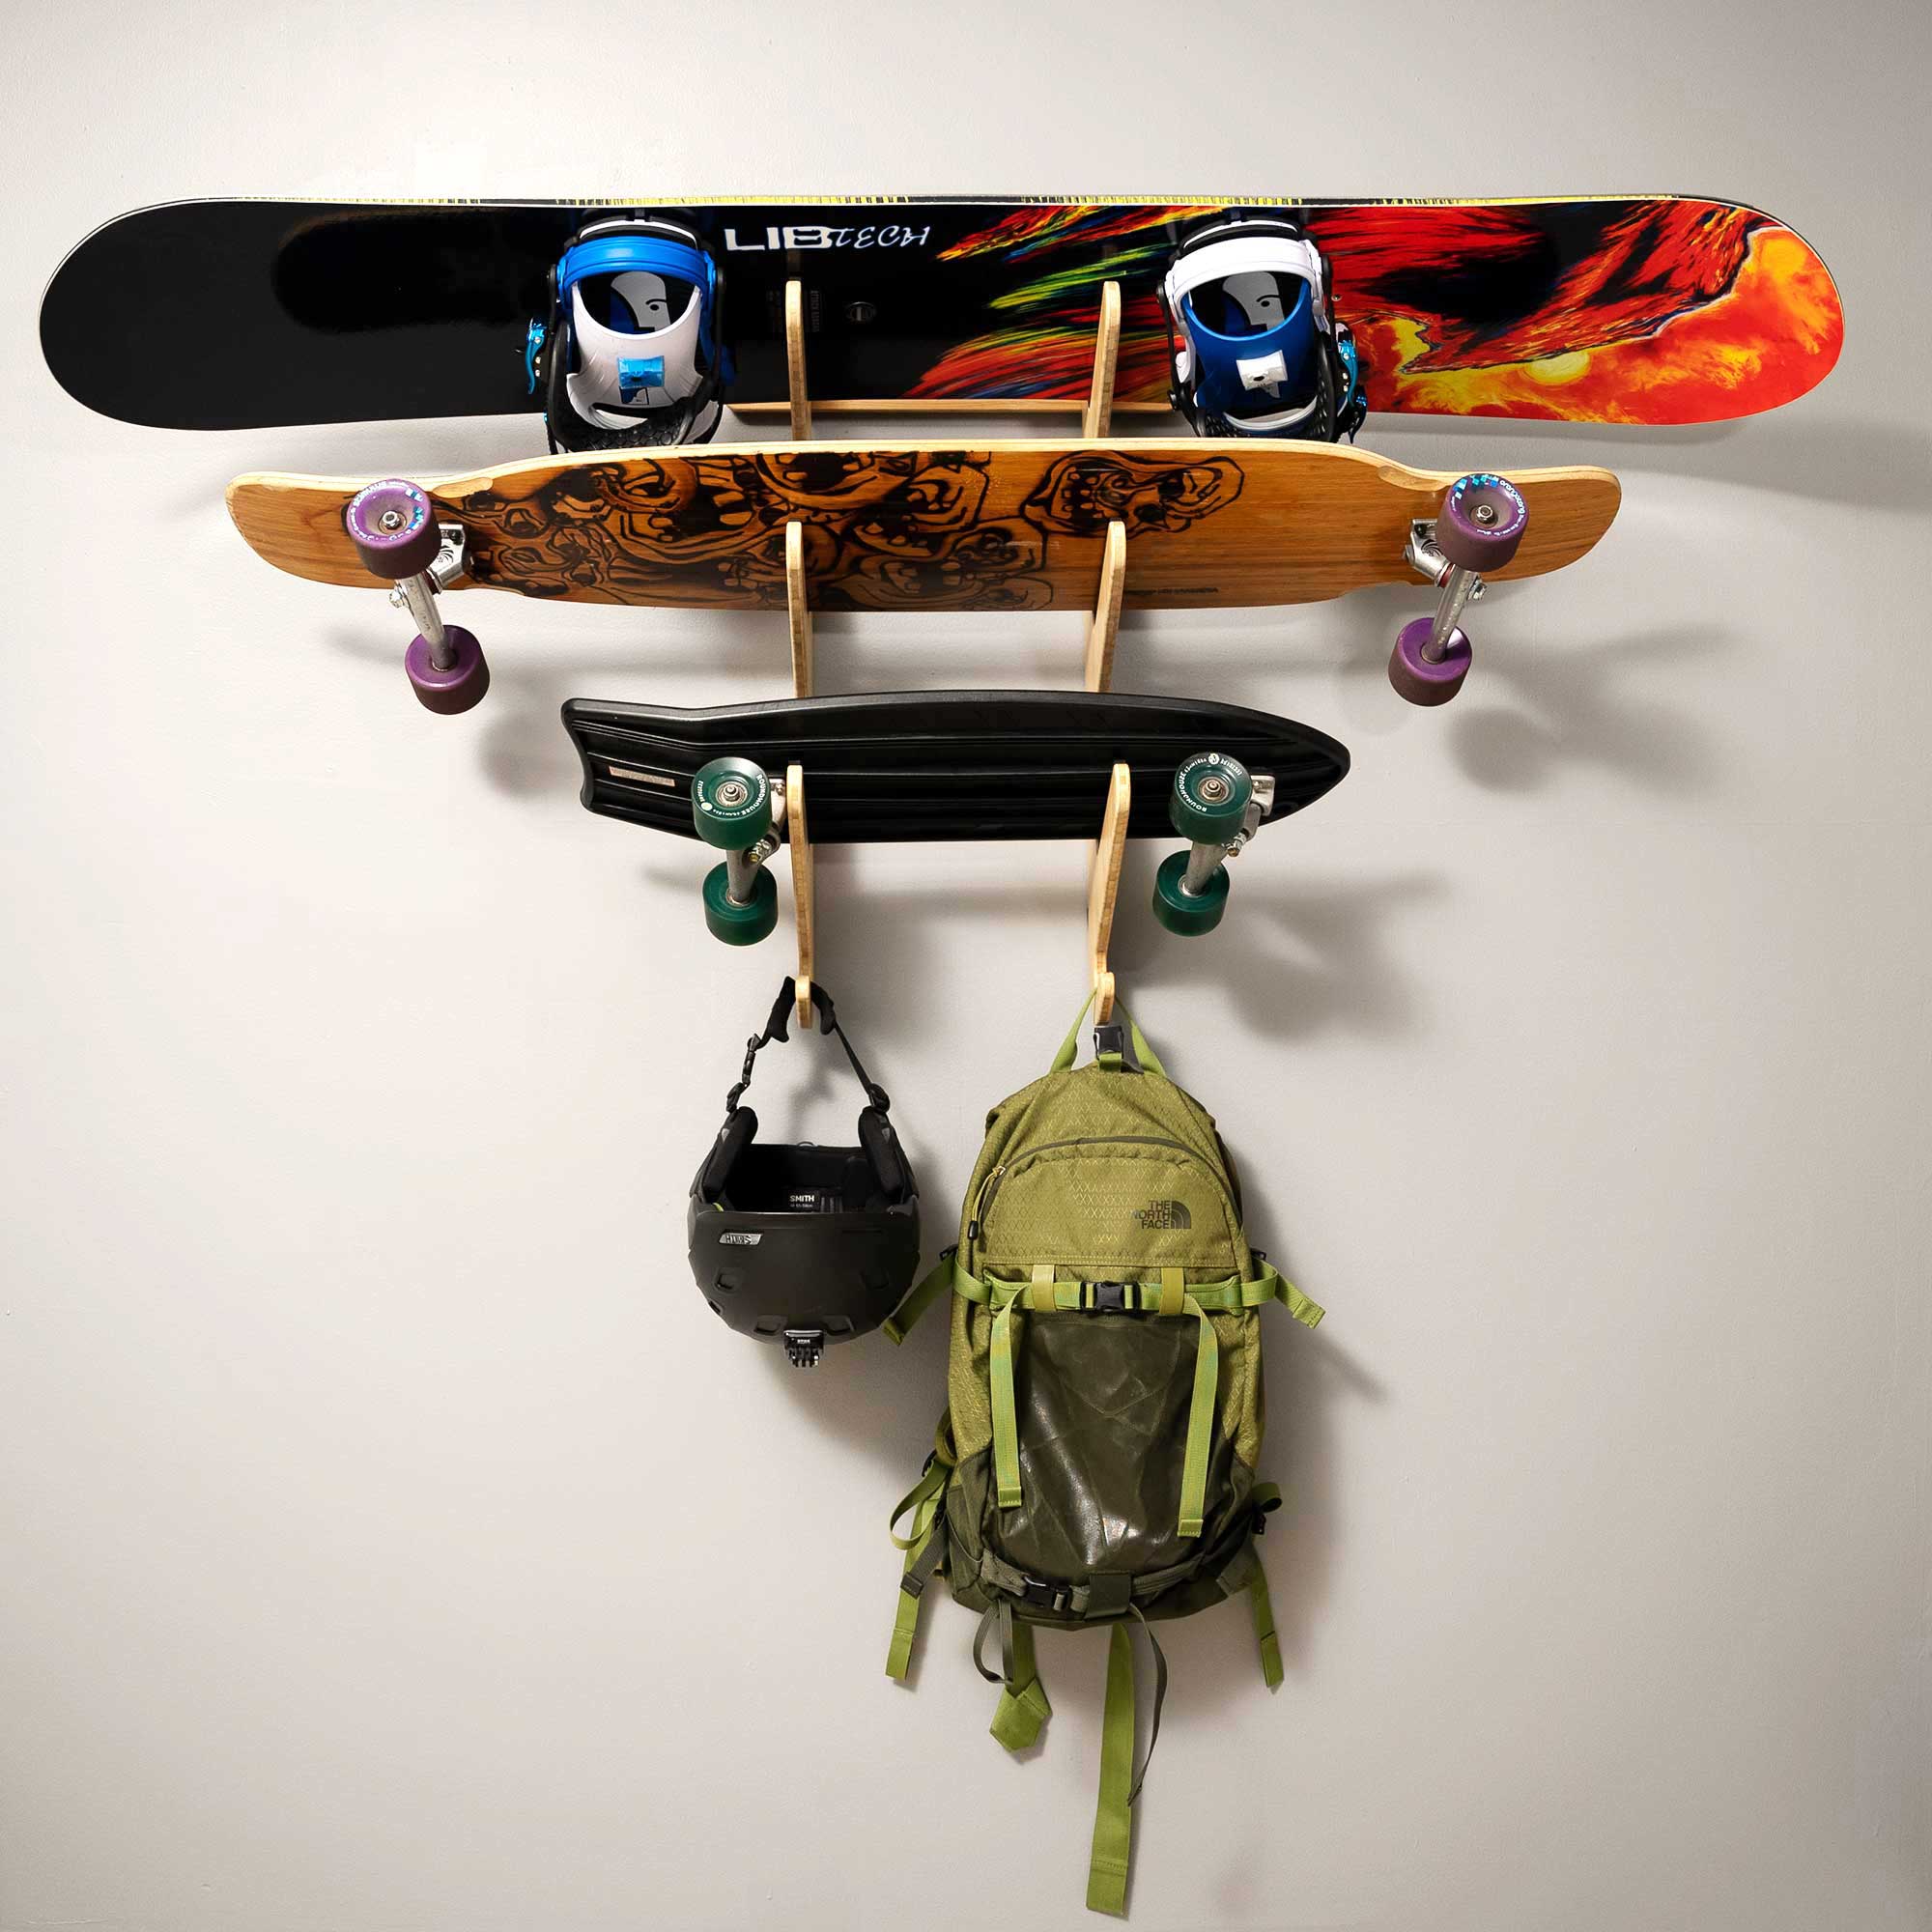 3 Board Rack for Skateboards and Snowboards - Wall Rack